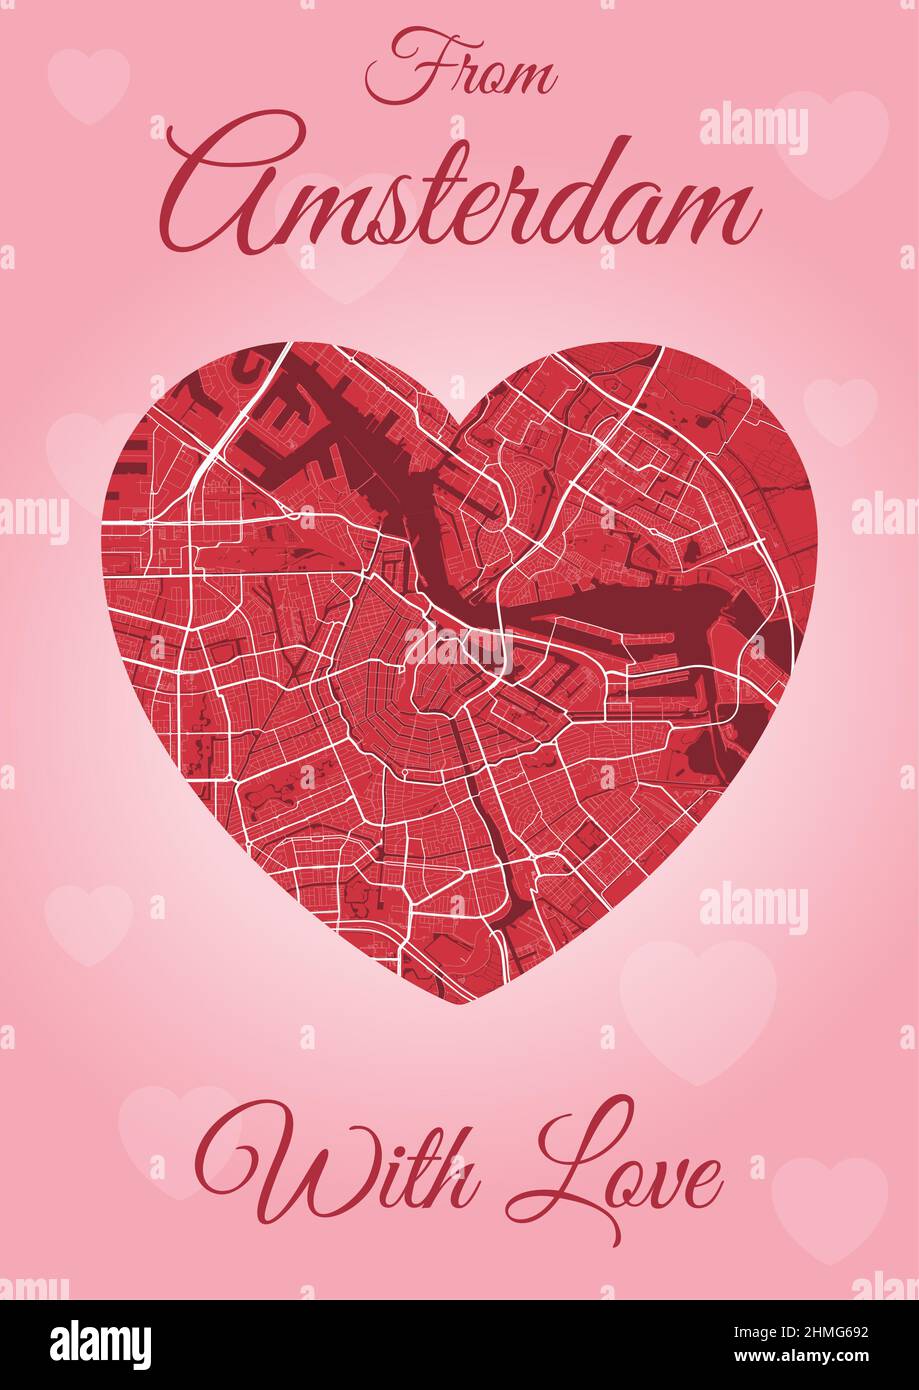 From Amsterdam with love card, city map in heart shape. Vertical A4 Pink and red color vector illustration. Love city travel cityscape. Stock Vector